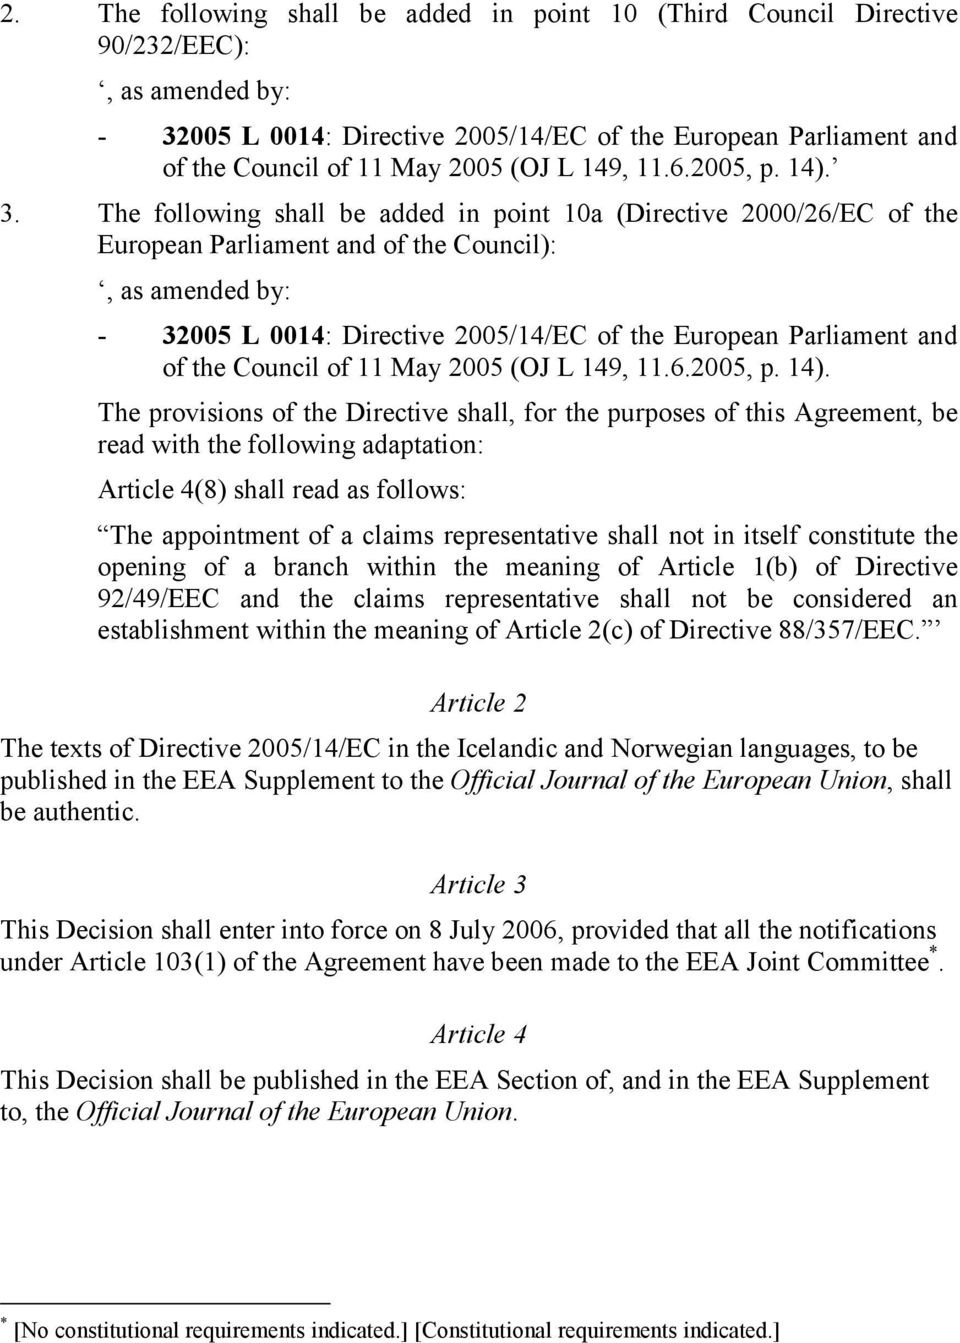 The following shall be added in point 10a (Directive 2000/26/EC of the European Parliament and of the Council):, as amended by: - 32005 L 0014: Directive 2005/14/EC of the European Parliament and of